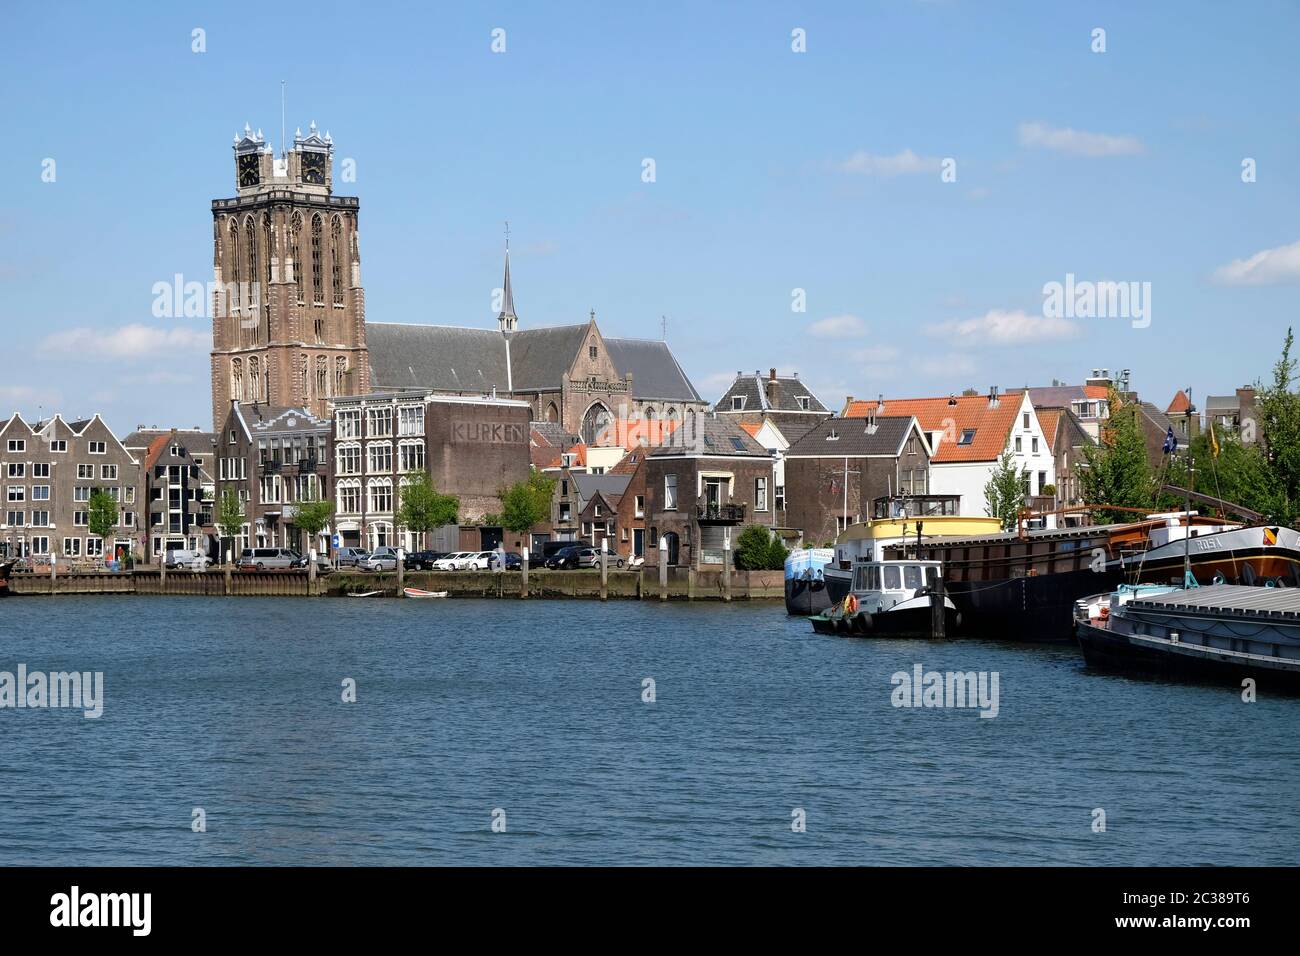 Dordrecht Minster or Church of our Lady from Kalkhaven Harbour Stock Photo